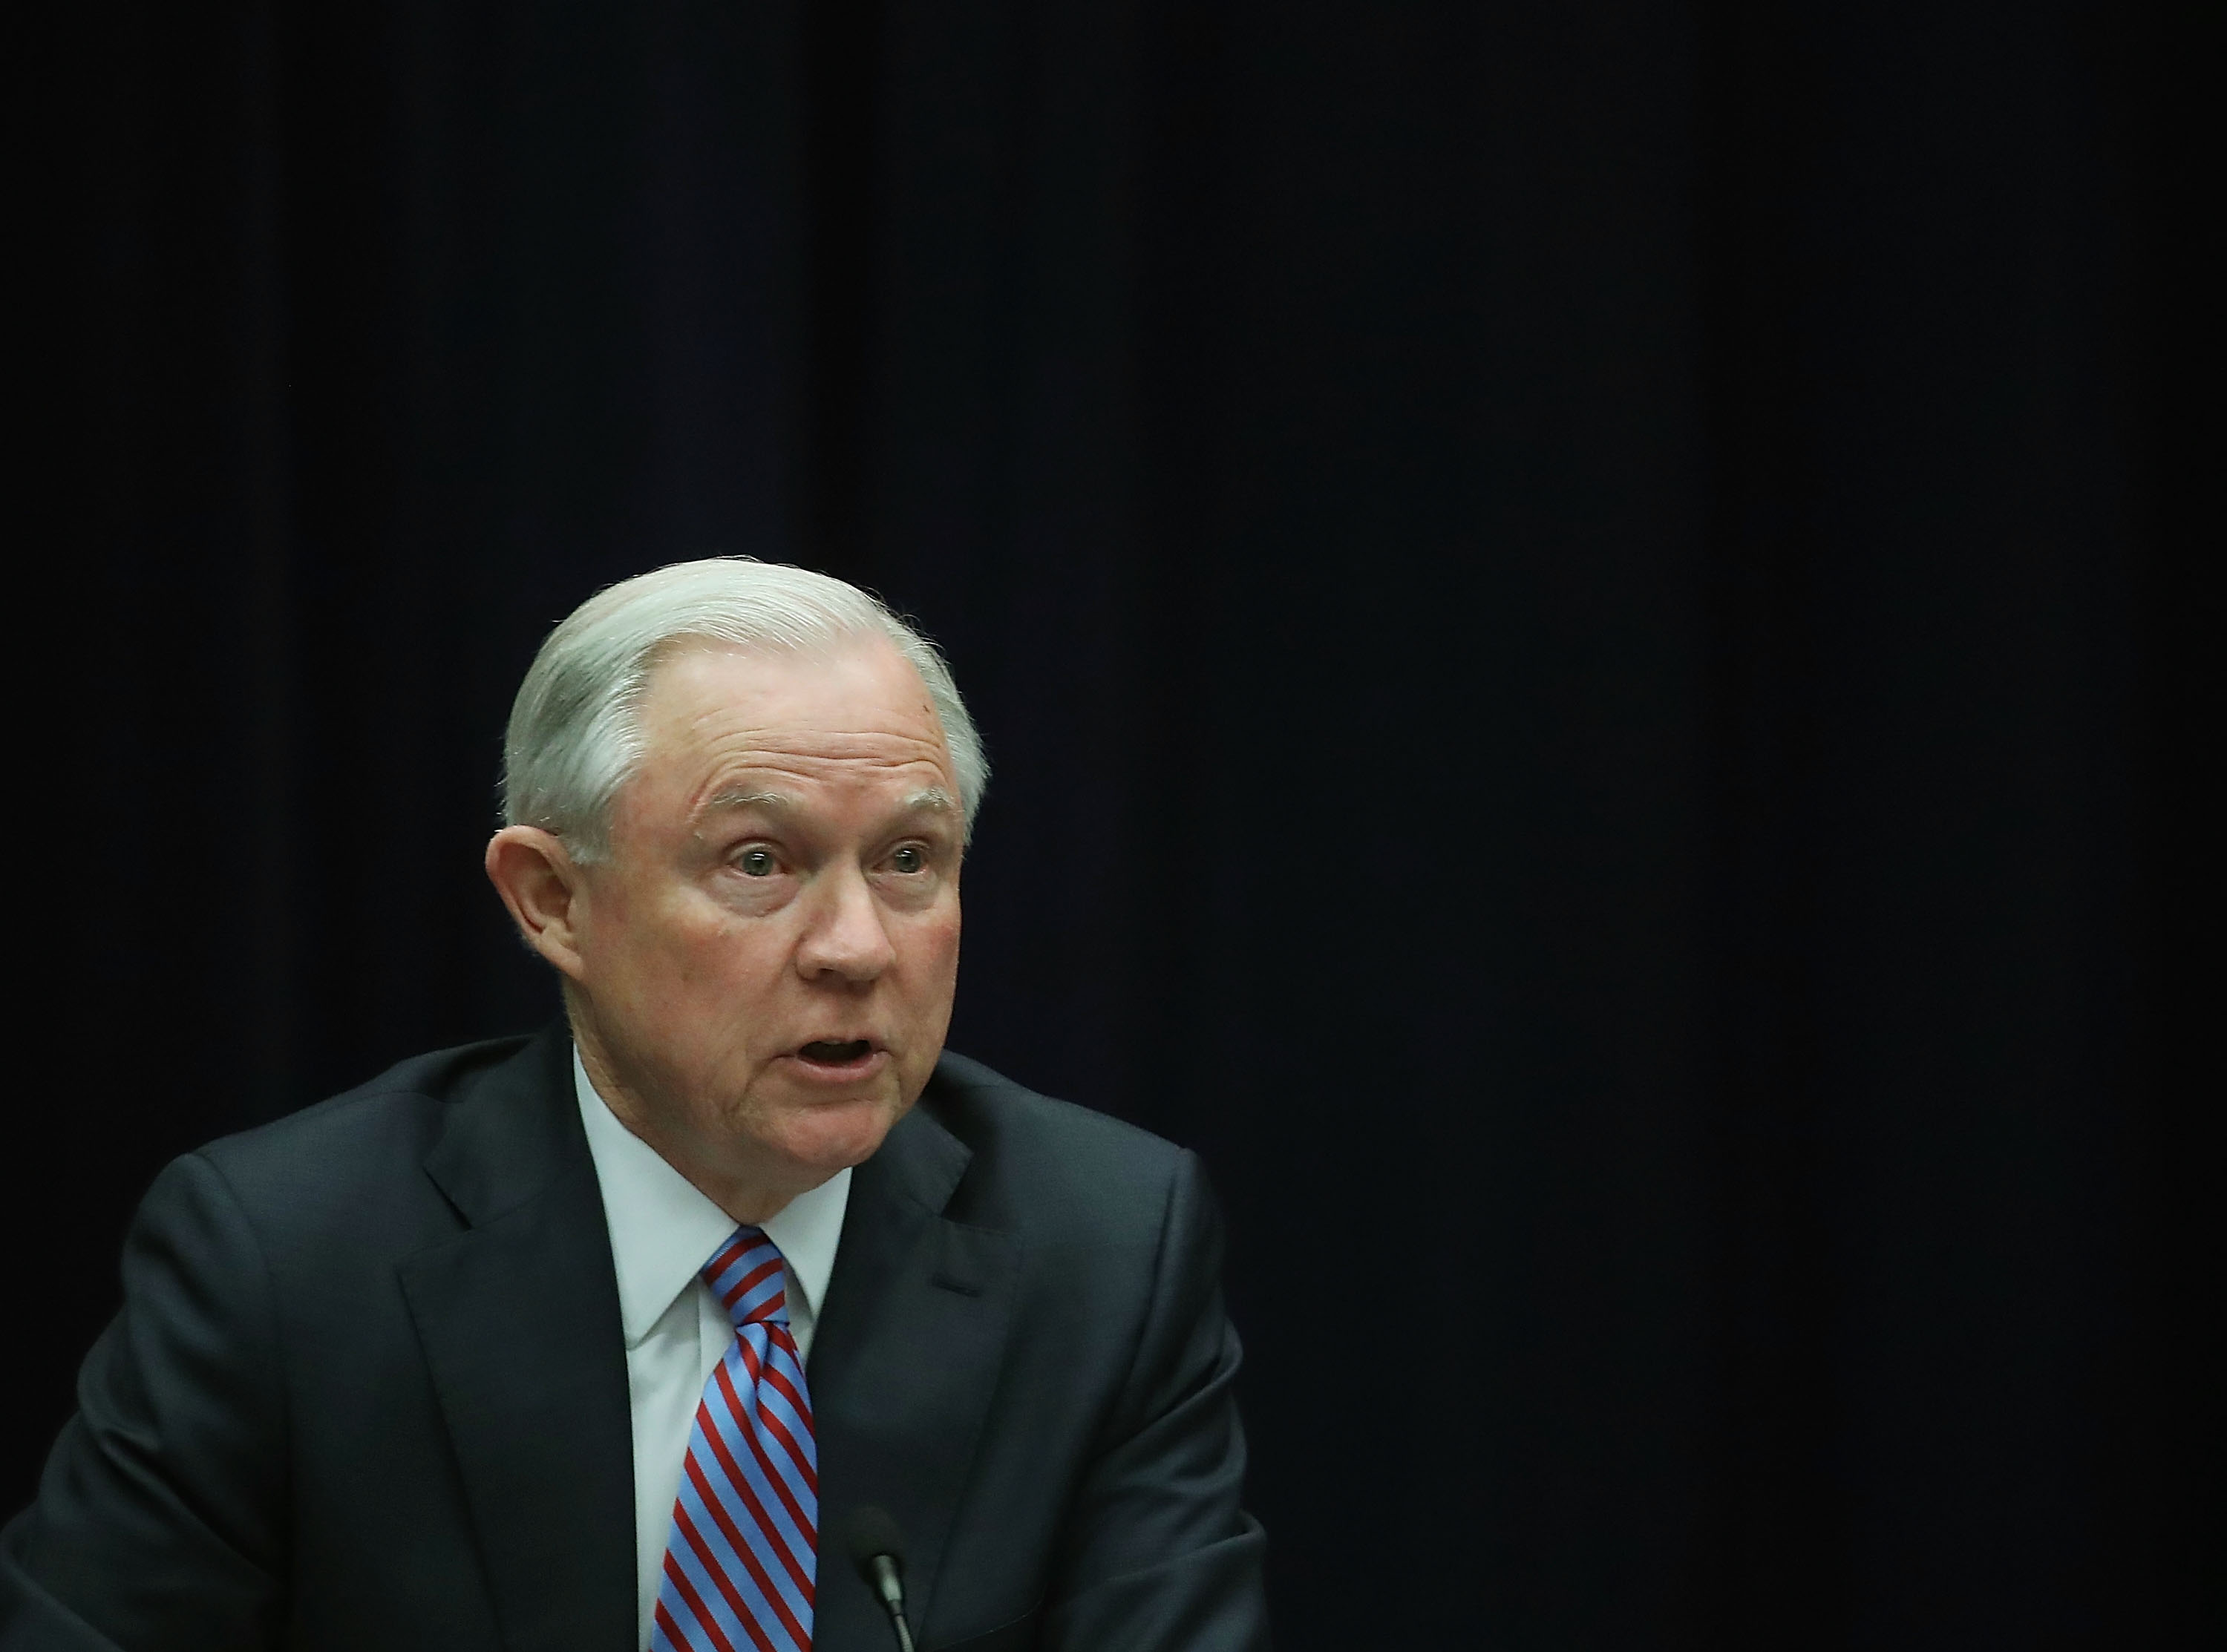 Attorney General Jeff Sessions speaks about organized gang violence at the Department of Justice, April 18, 2016 in Washington, D.C. (Mark Wilson—Getty Images)